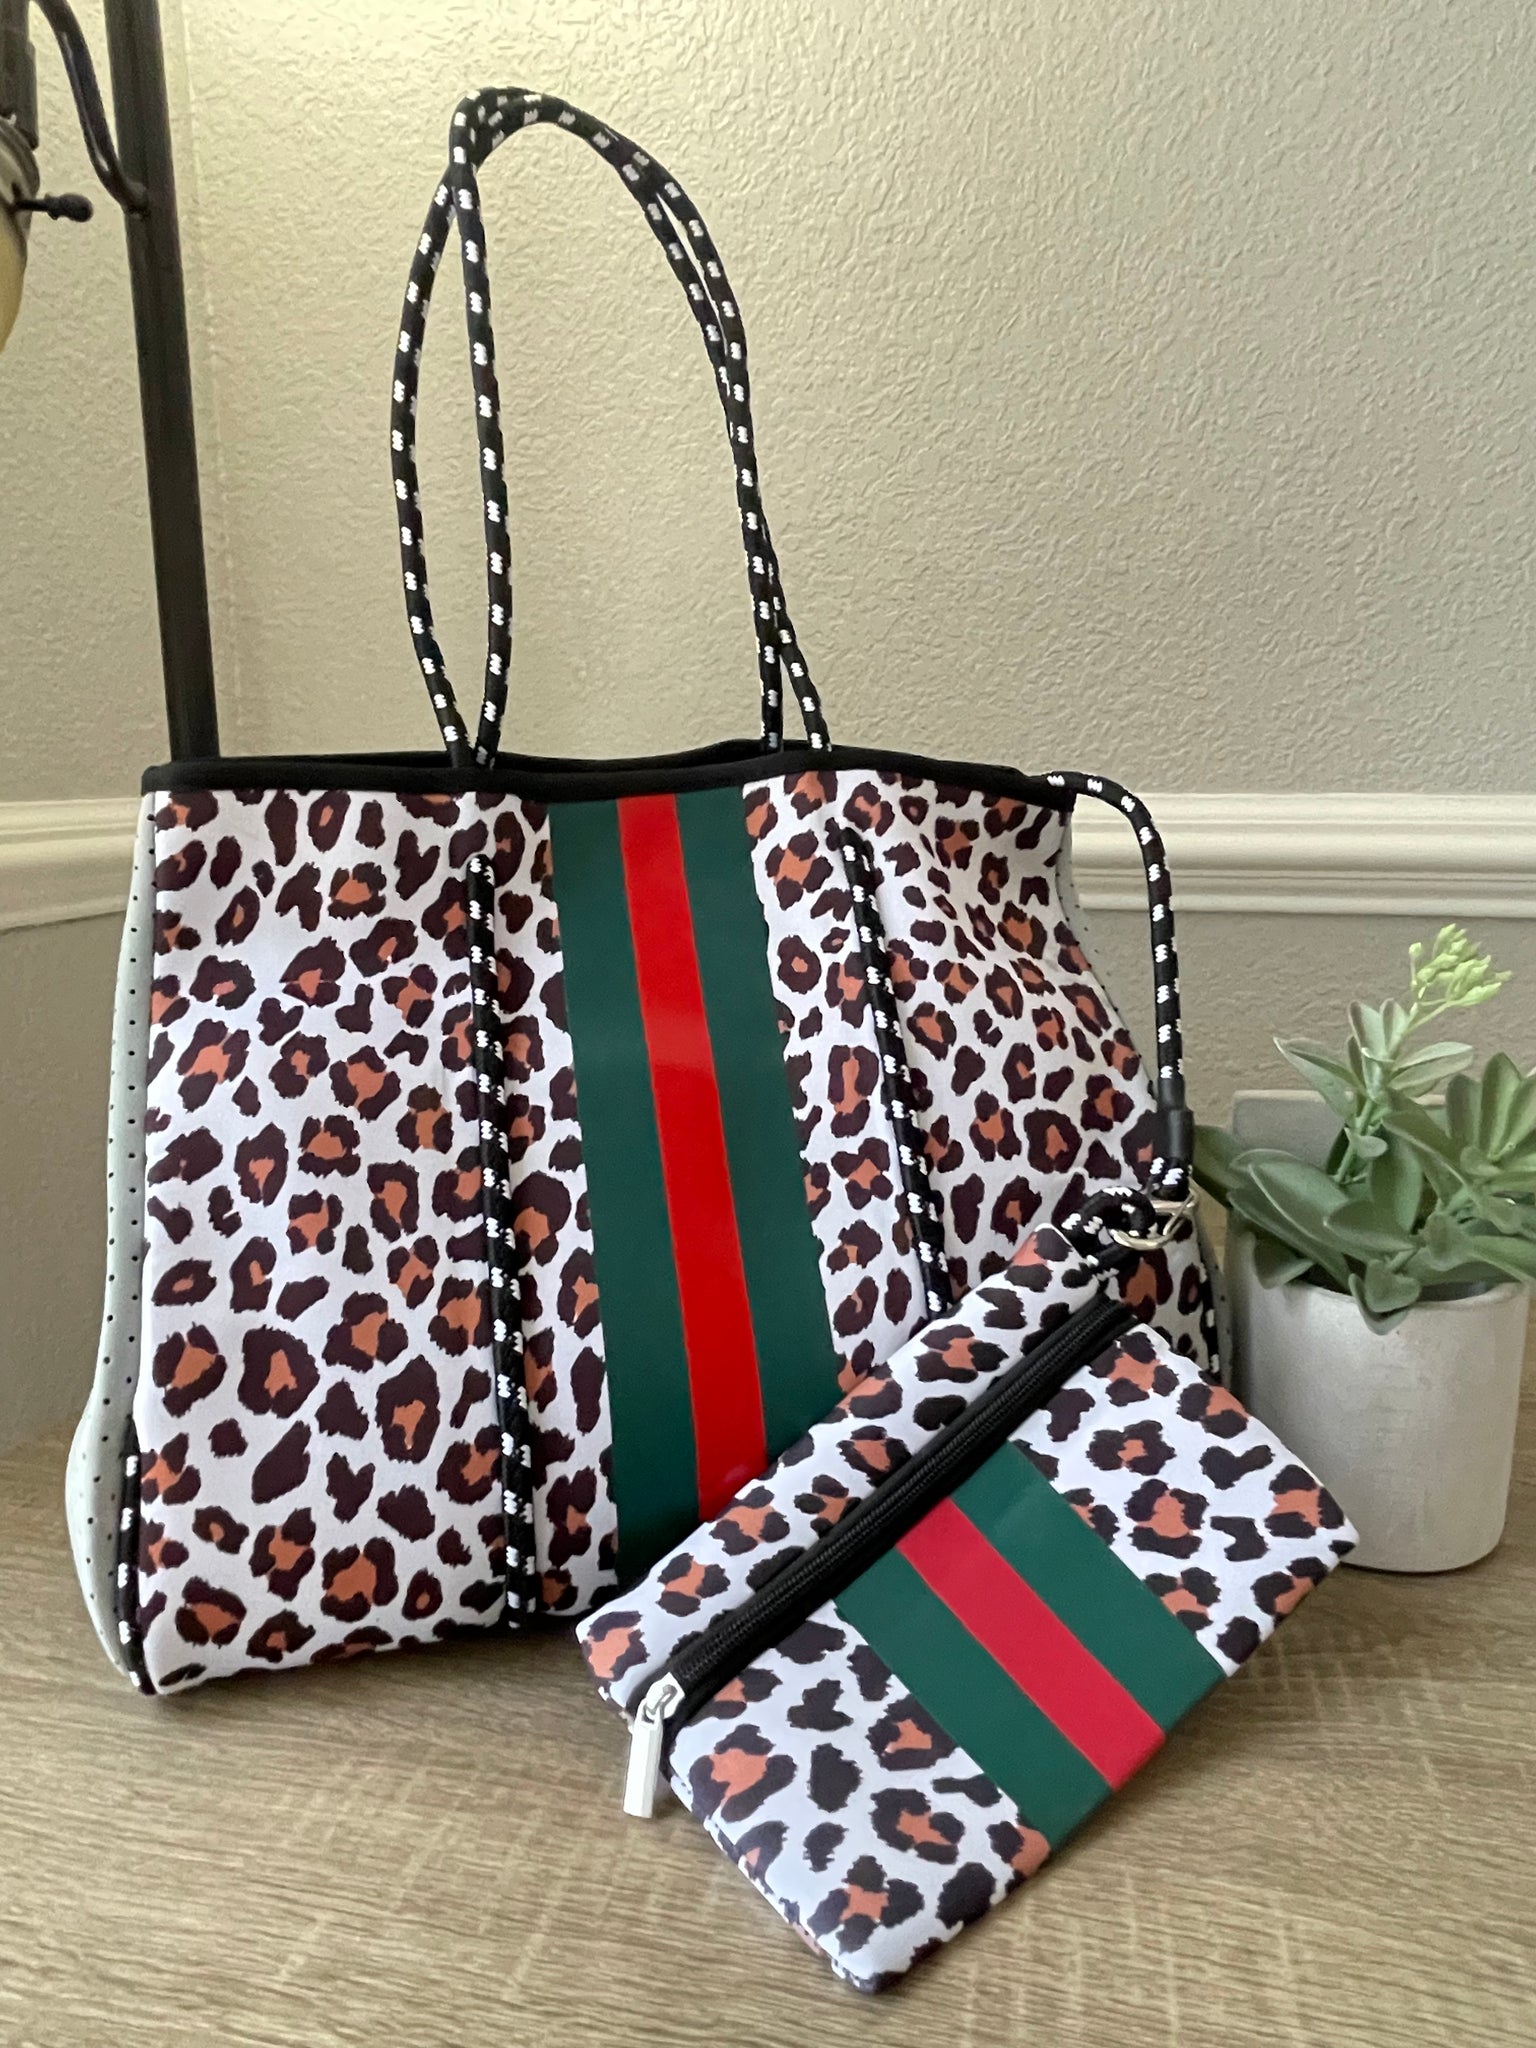 Neoprene Tote Bag Leopard with Red/Green Striped